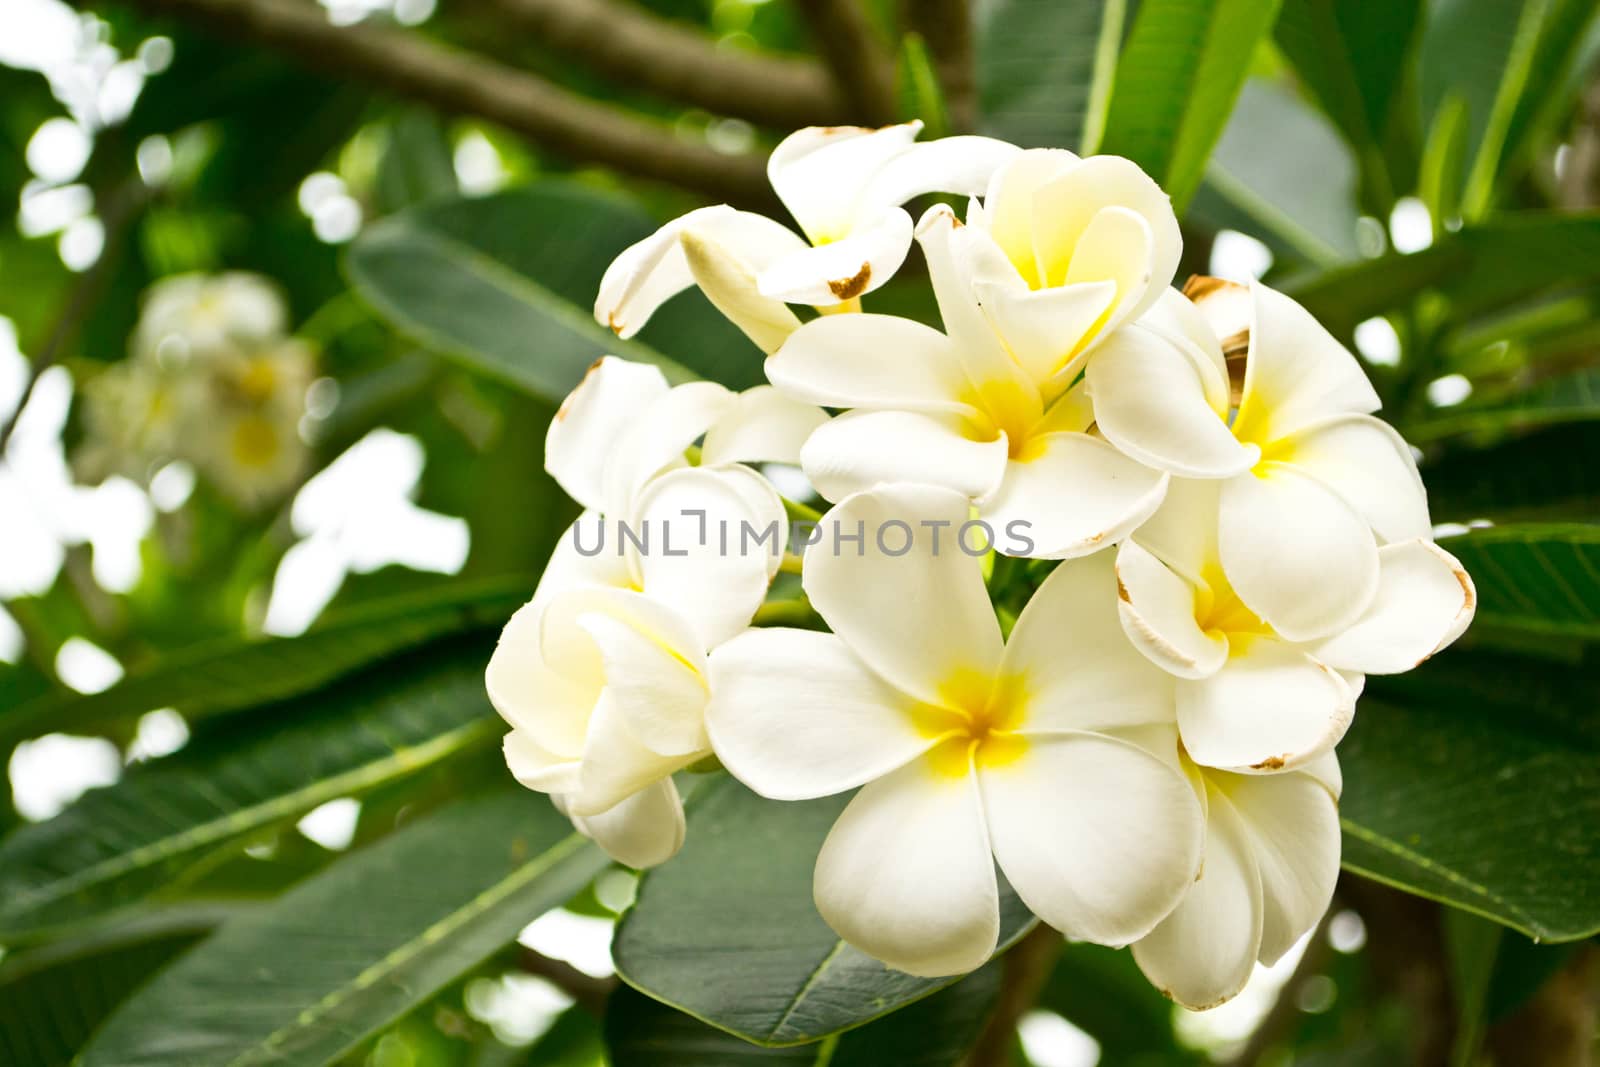 Frangipani flowers with leaves in background by Thanamat